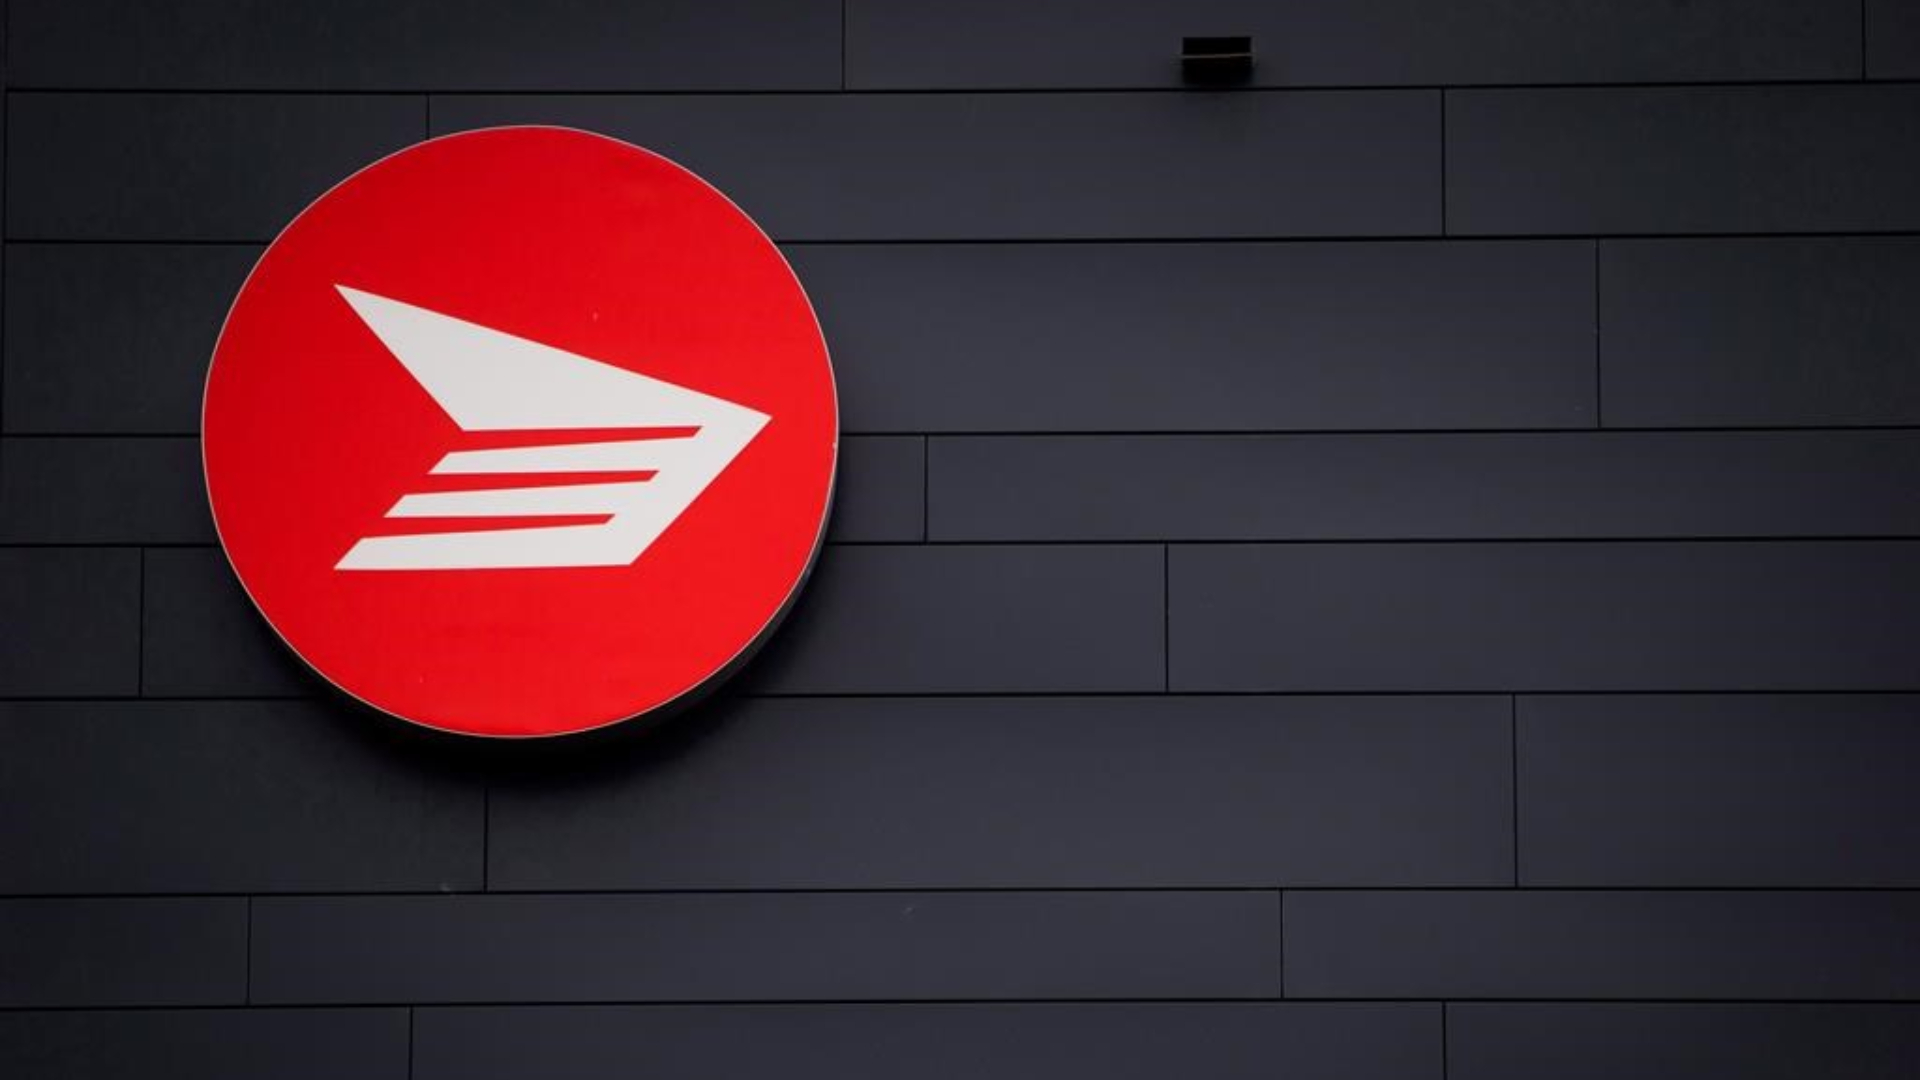 Canada Post considers eliminating daily mail deliveries